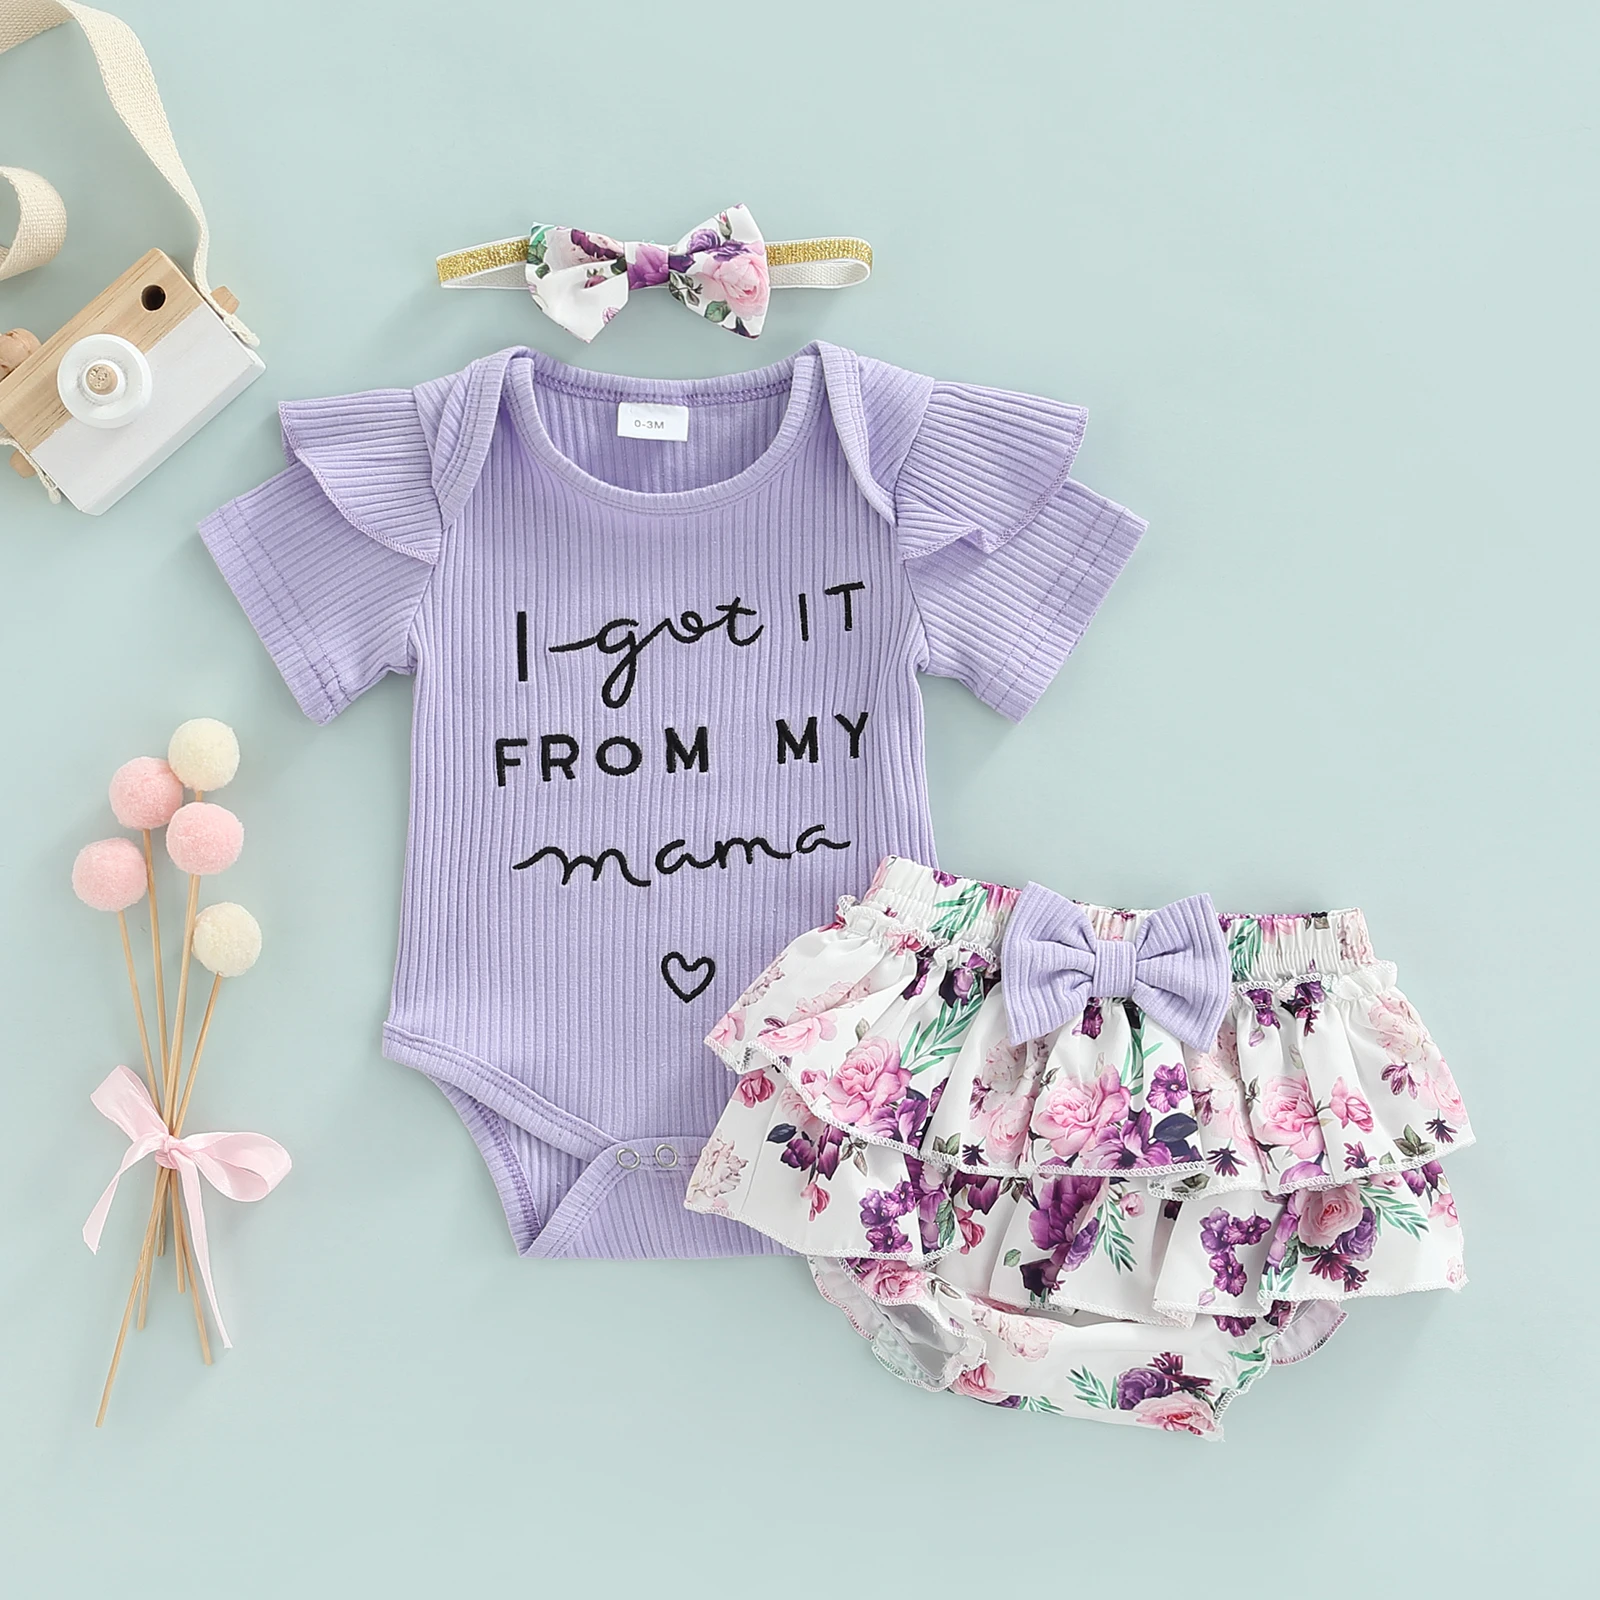 Newborn Baby Girl Clothes Set Summer Letter Short Sleeve Romper Flower Shorts Headband 3Pcs Outfit New Born Infant Clothing baby knitted clothing set